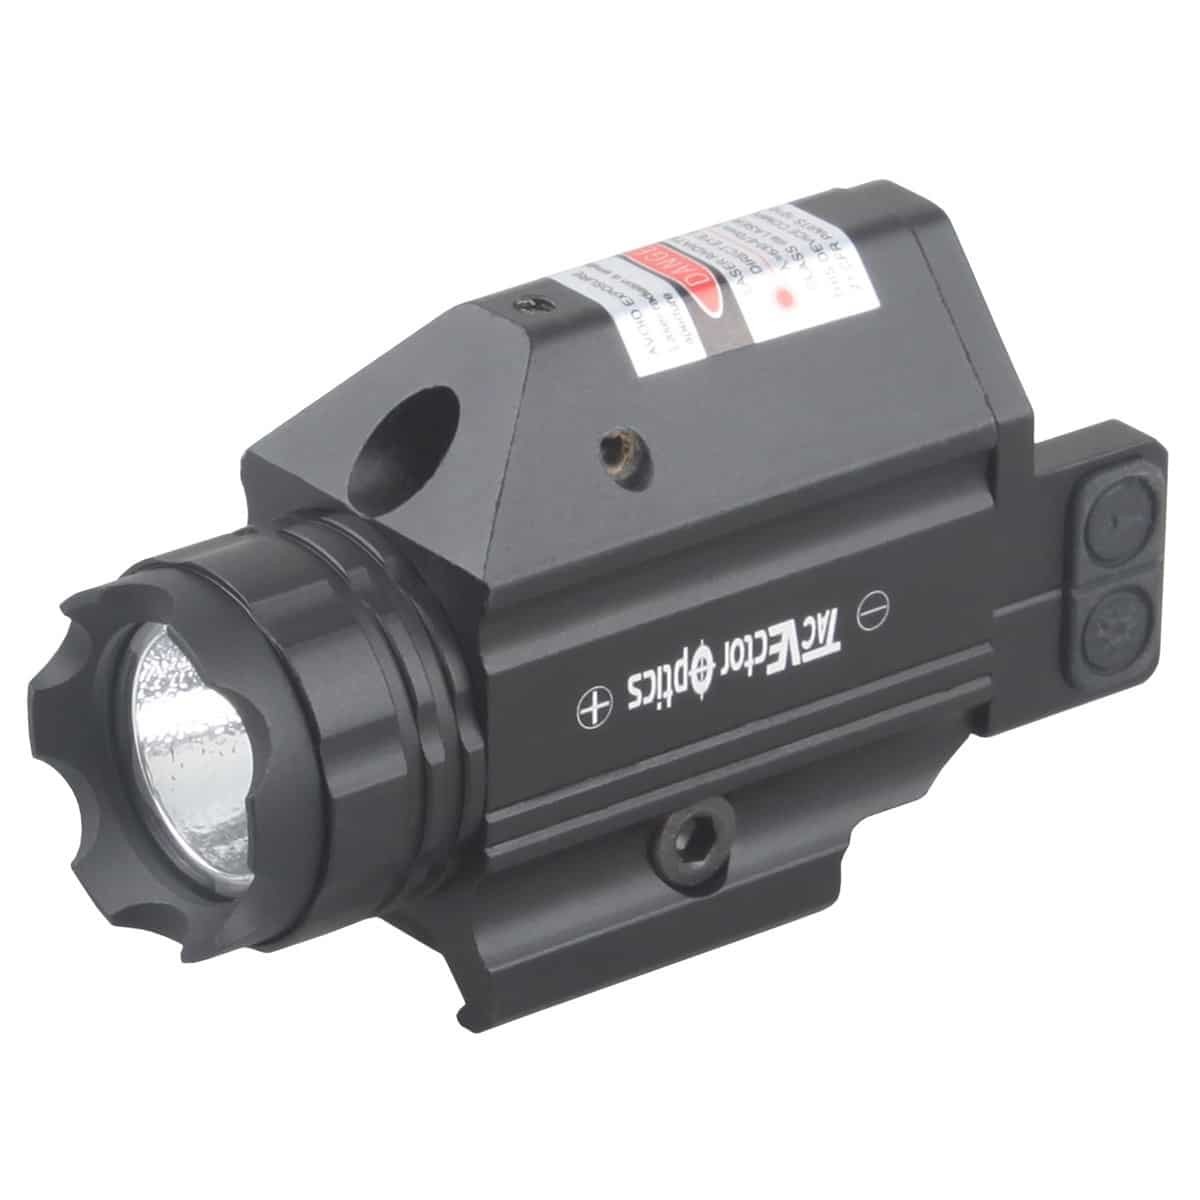 Doublecross Compact Red Laser